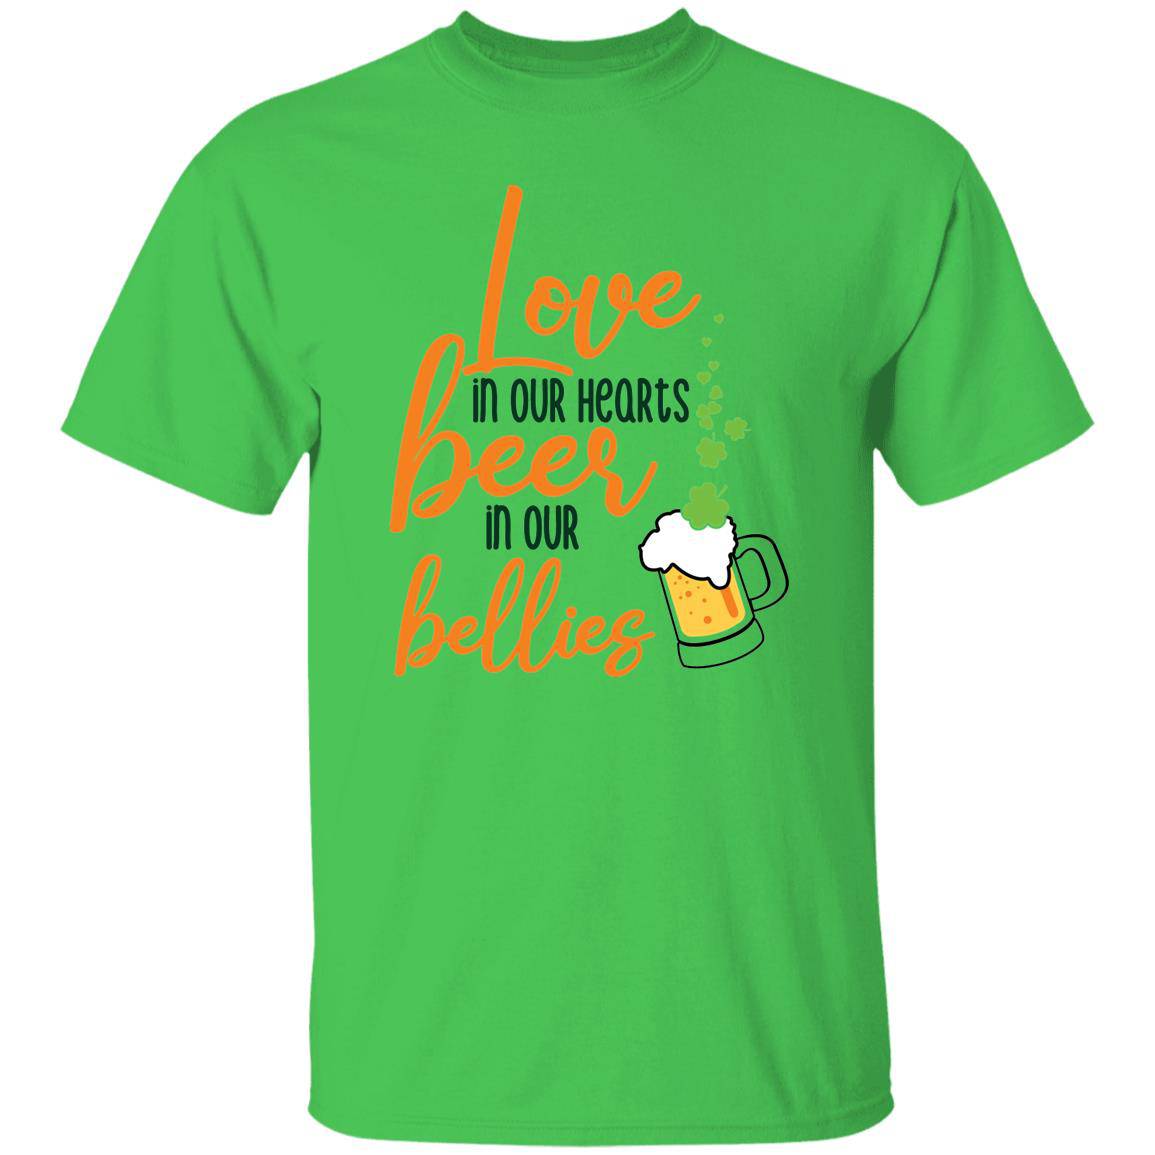 Love in Our Hearts and Beer in Our Bellies Classic T-Shirt - Expressive DeZien 